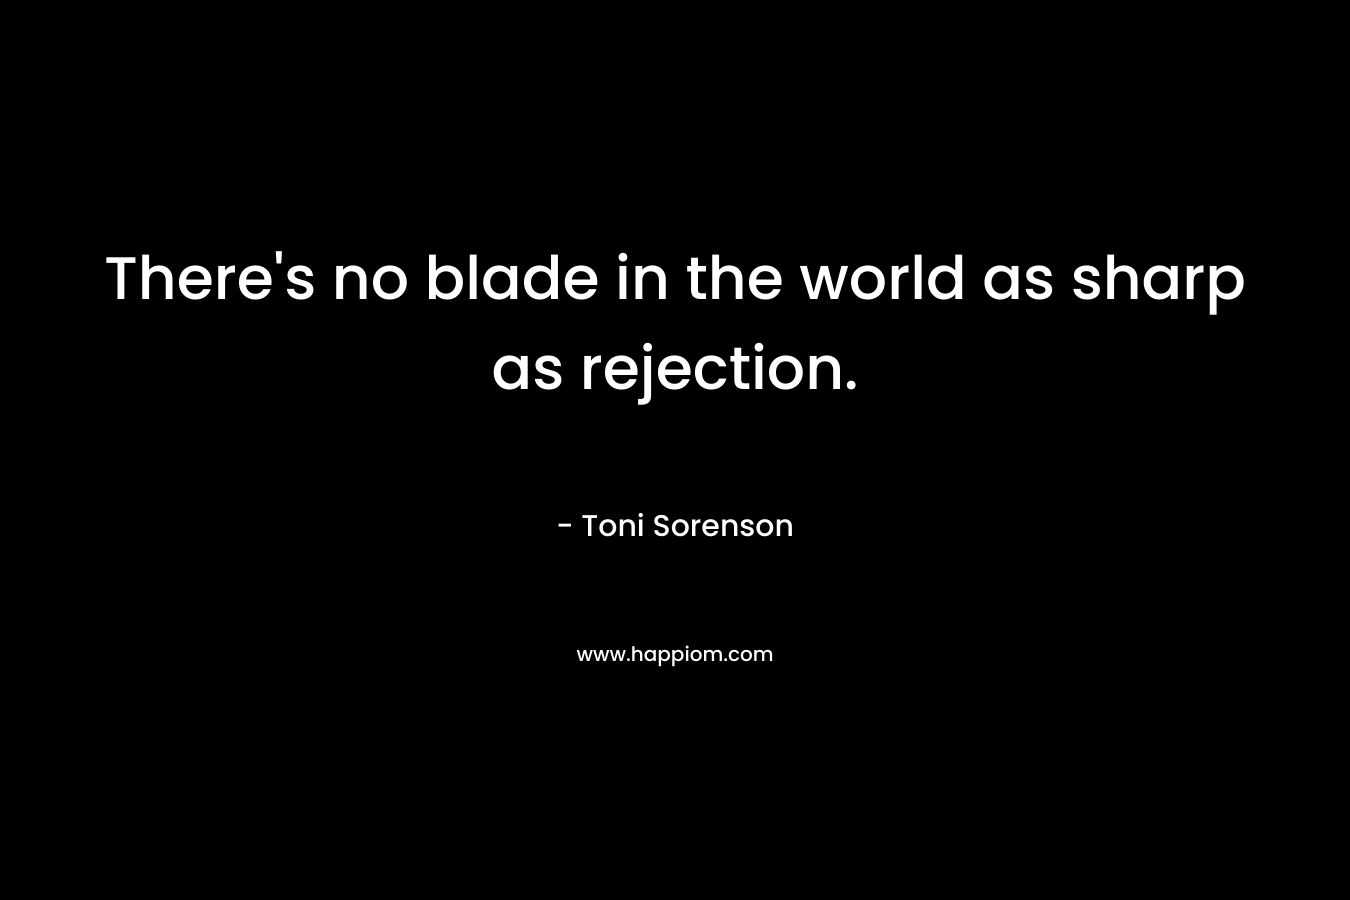 There's no blade in the world as sharp as rejection.